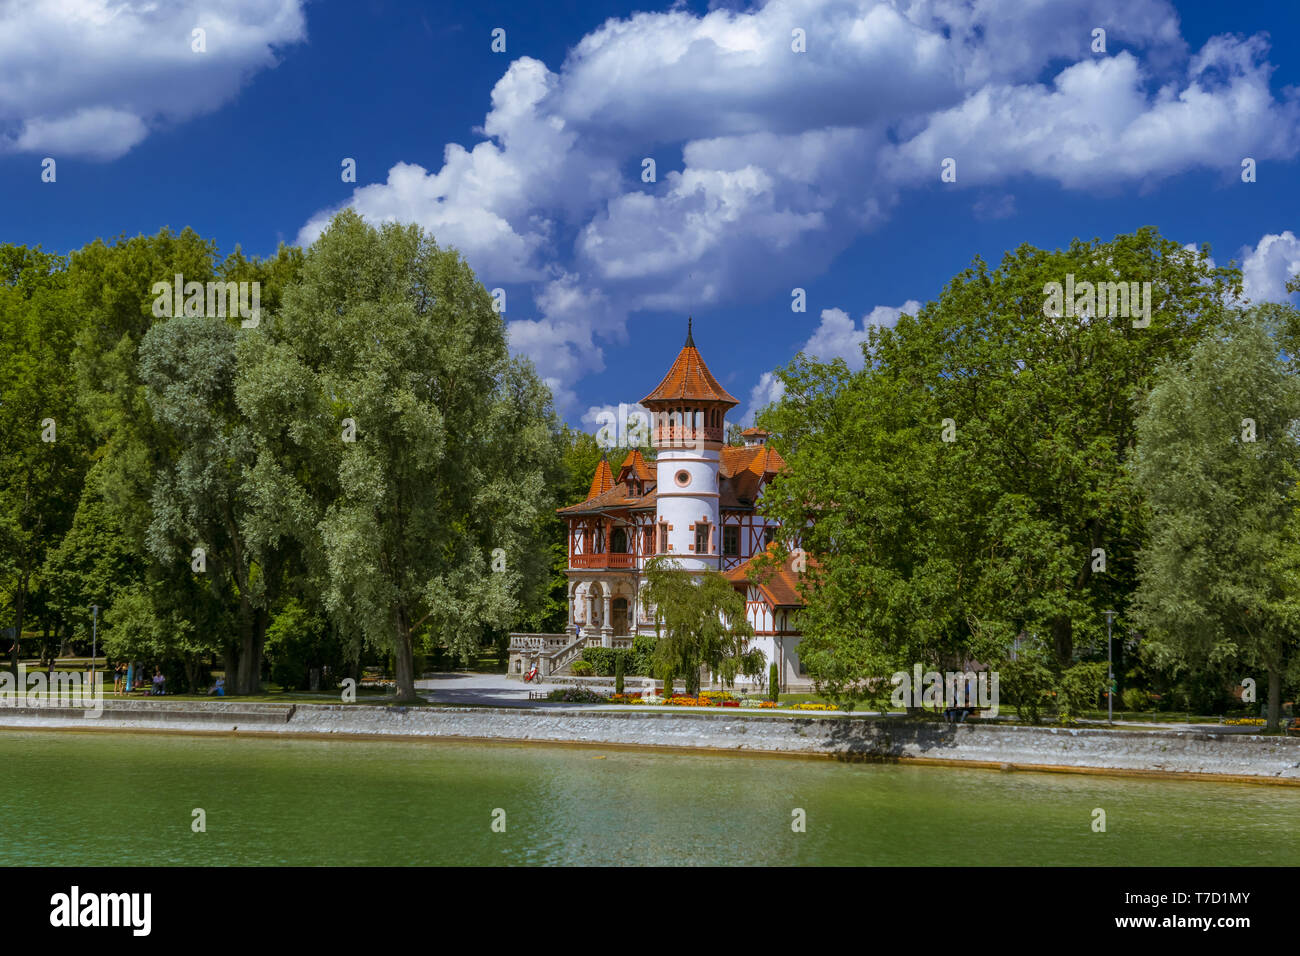 Piccolo castello in Herrsching a Ammersee, Lago Ammer, Baviera, Germania Foto Stock